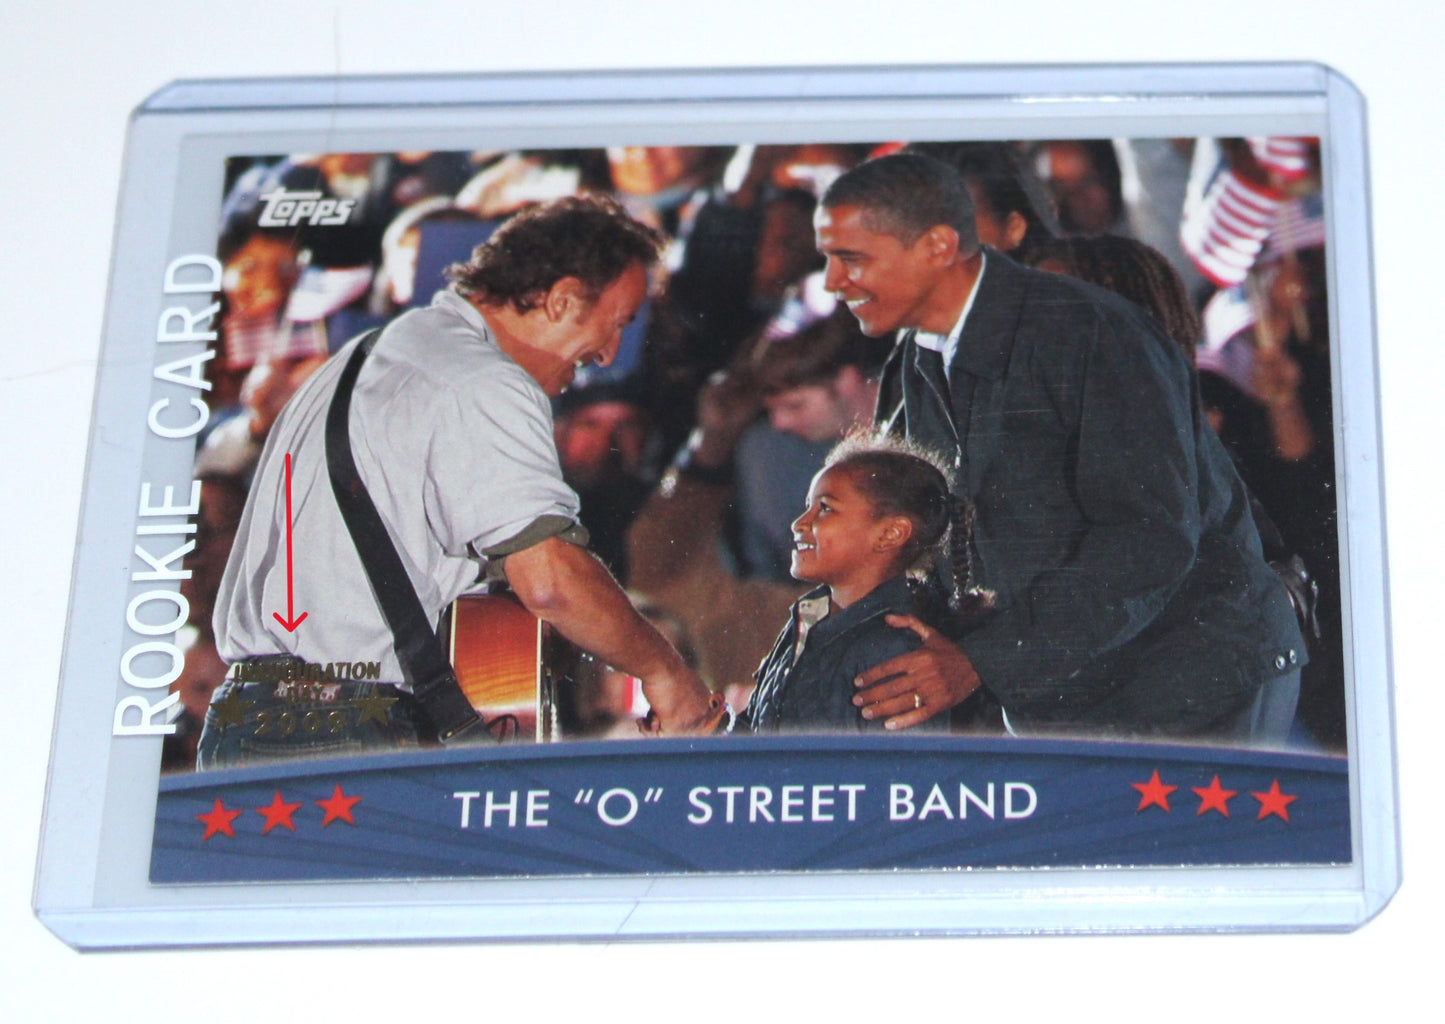 Bruce Springsteen TOPPS Gold Foil Stamp 2009 Inauguration Day - Official Trading Card - rarest of all!